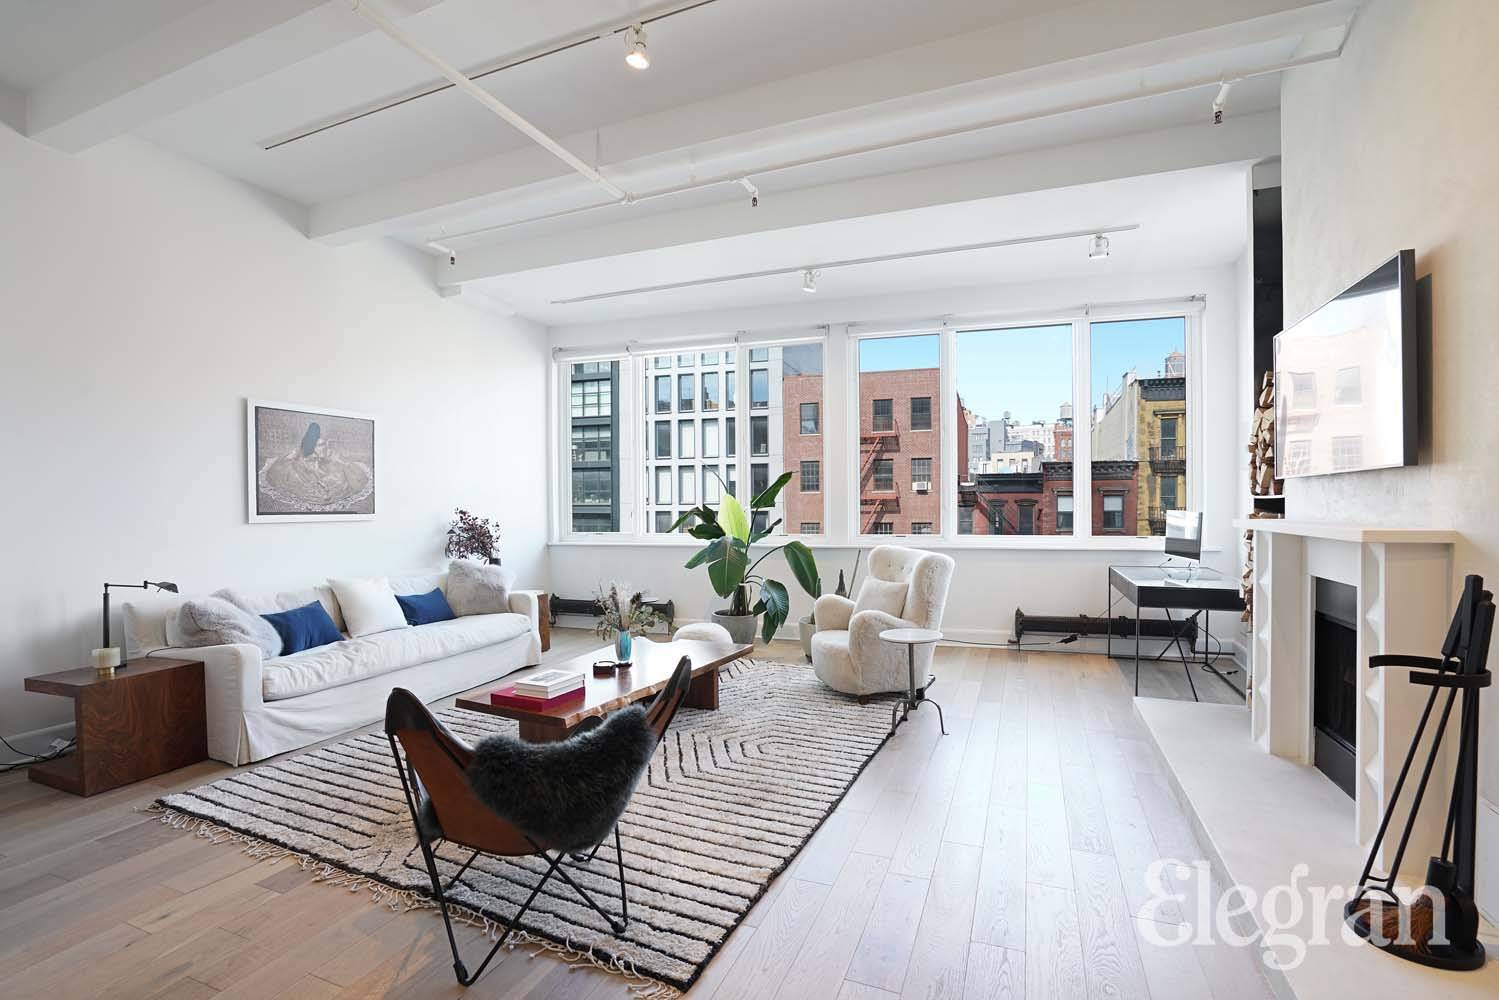 Available Furnished Unfurnished Immerse yourself in a life of comfort and convenience with this stunning apartment at 259 Bowery.